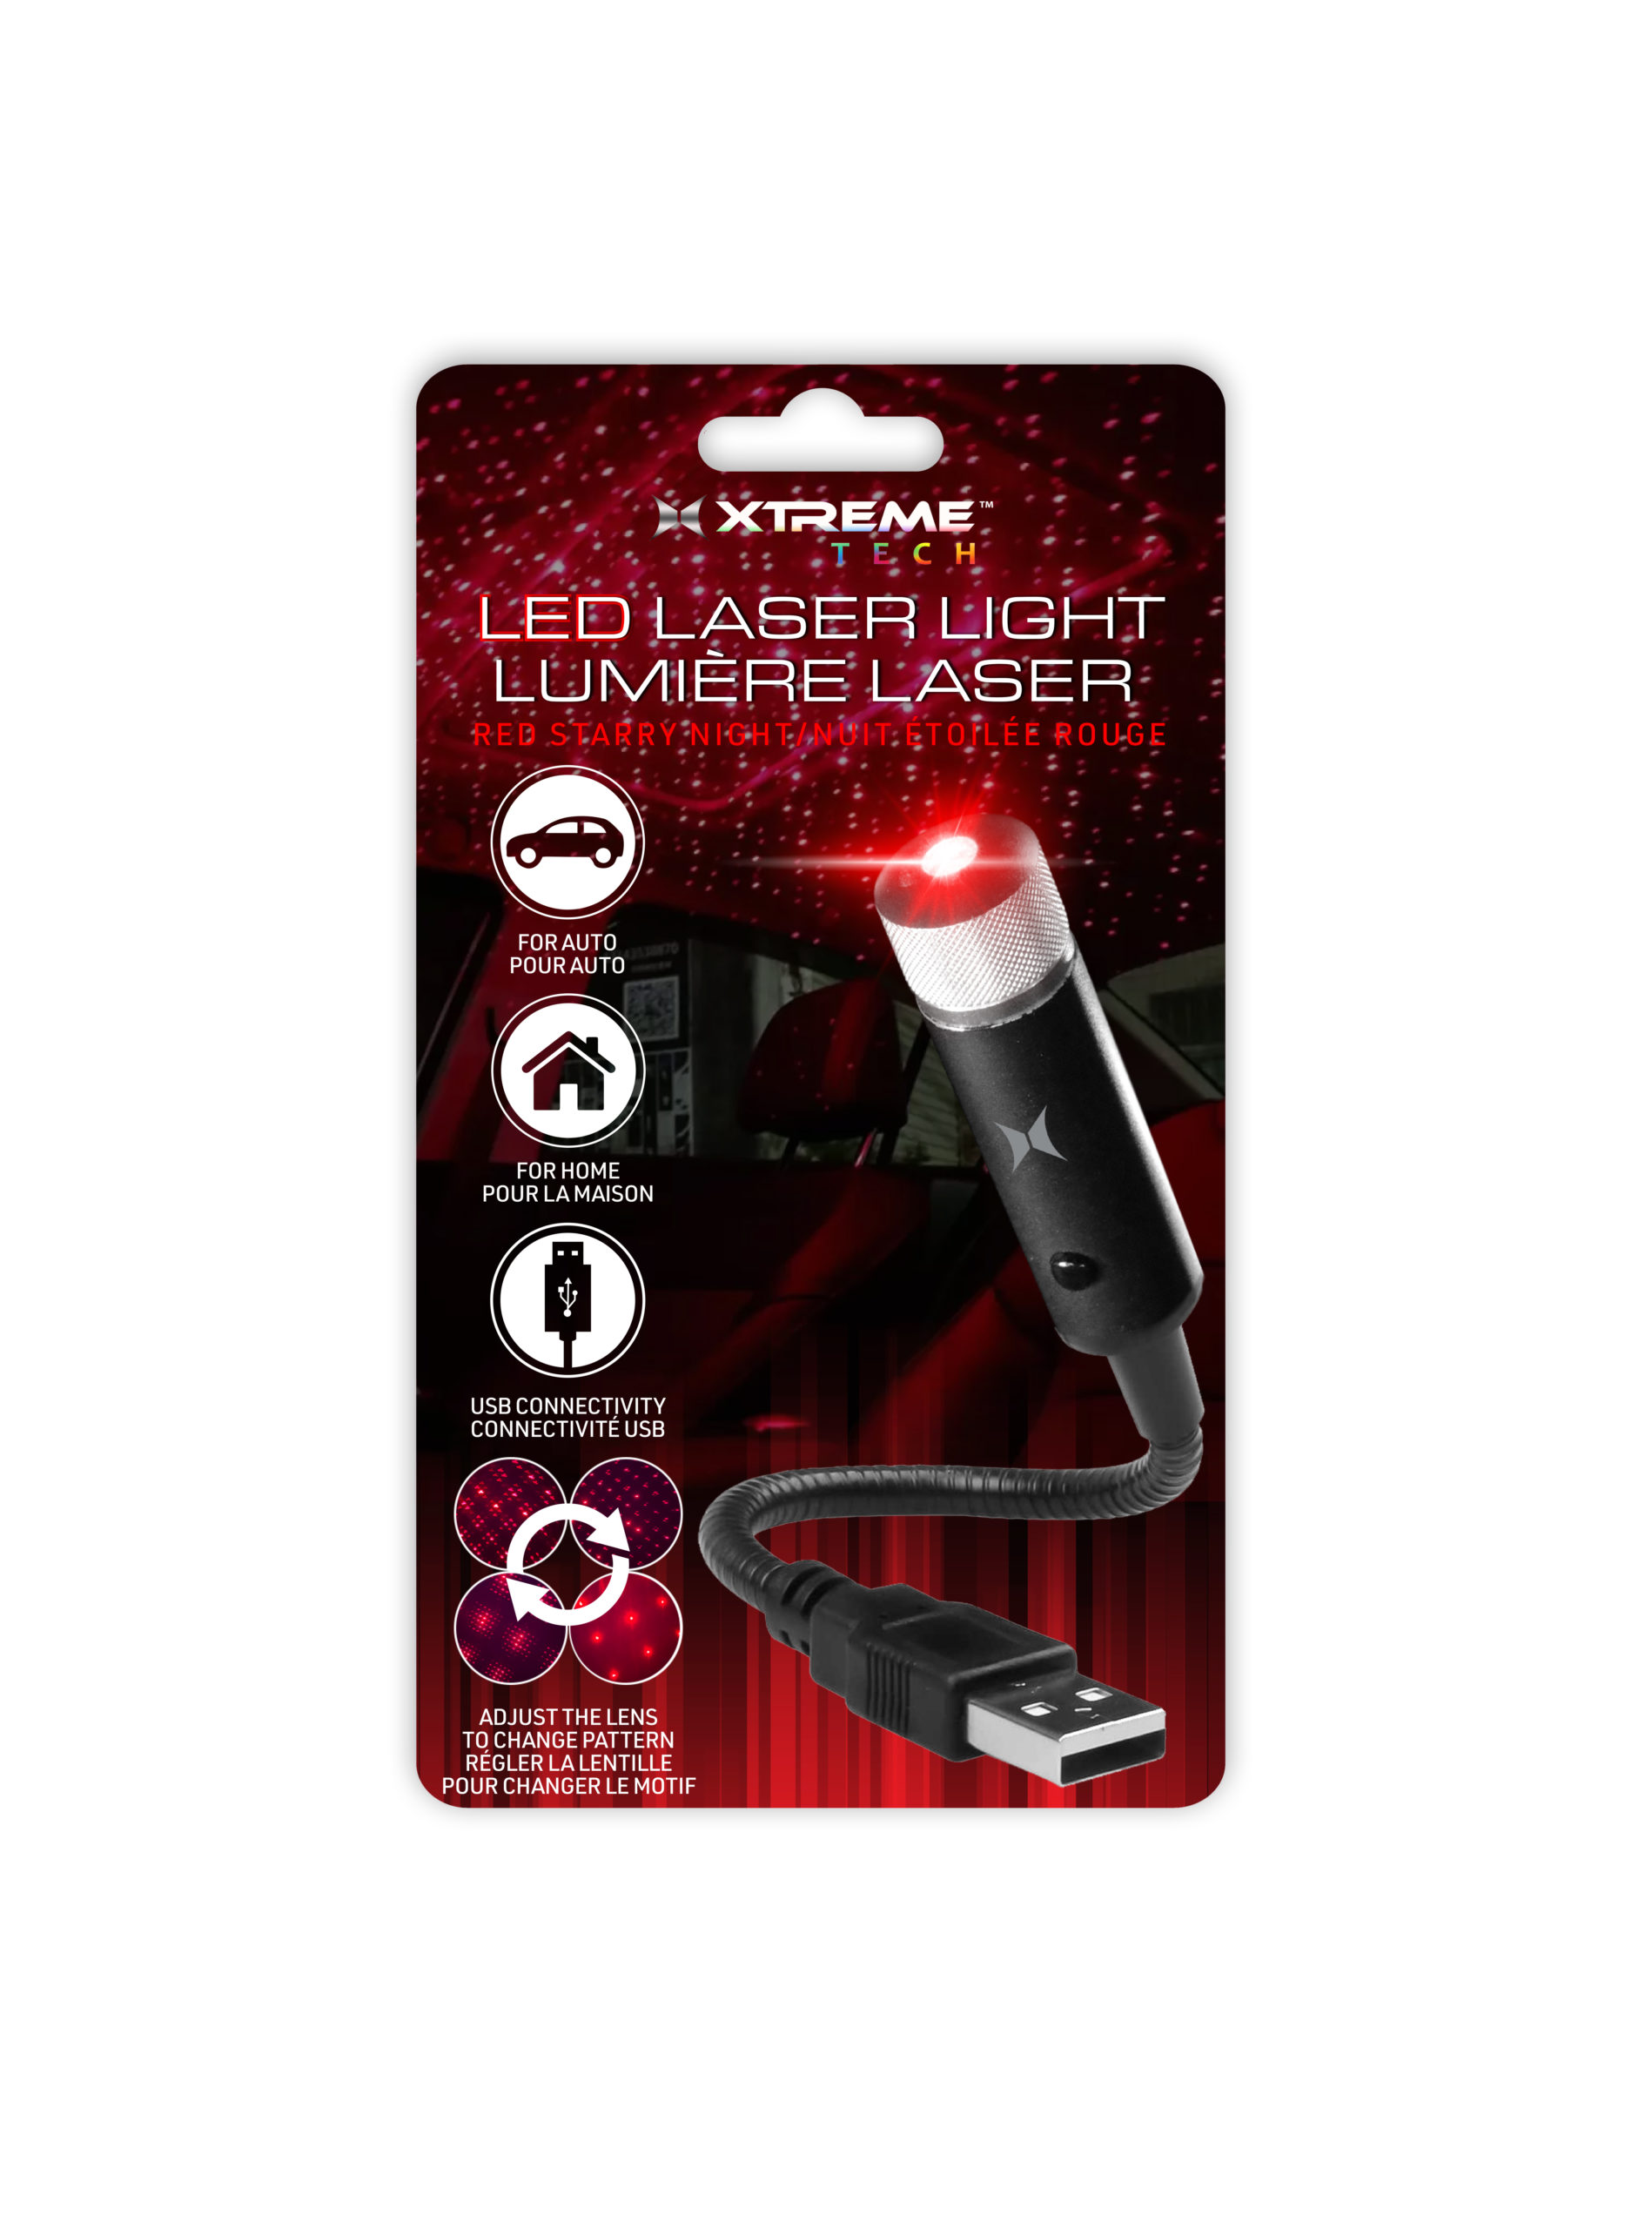 Starry Night USB Laser Light, Auto or Home, USB Powered